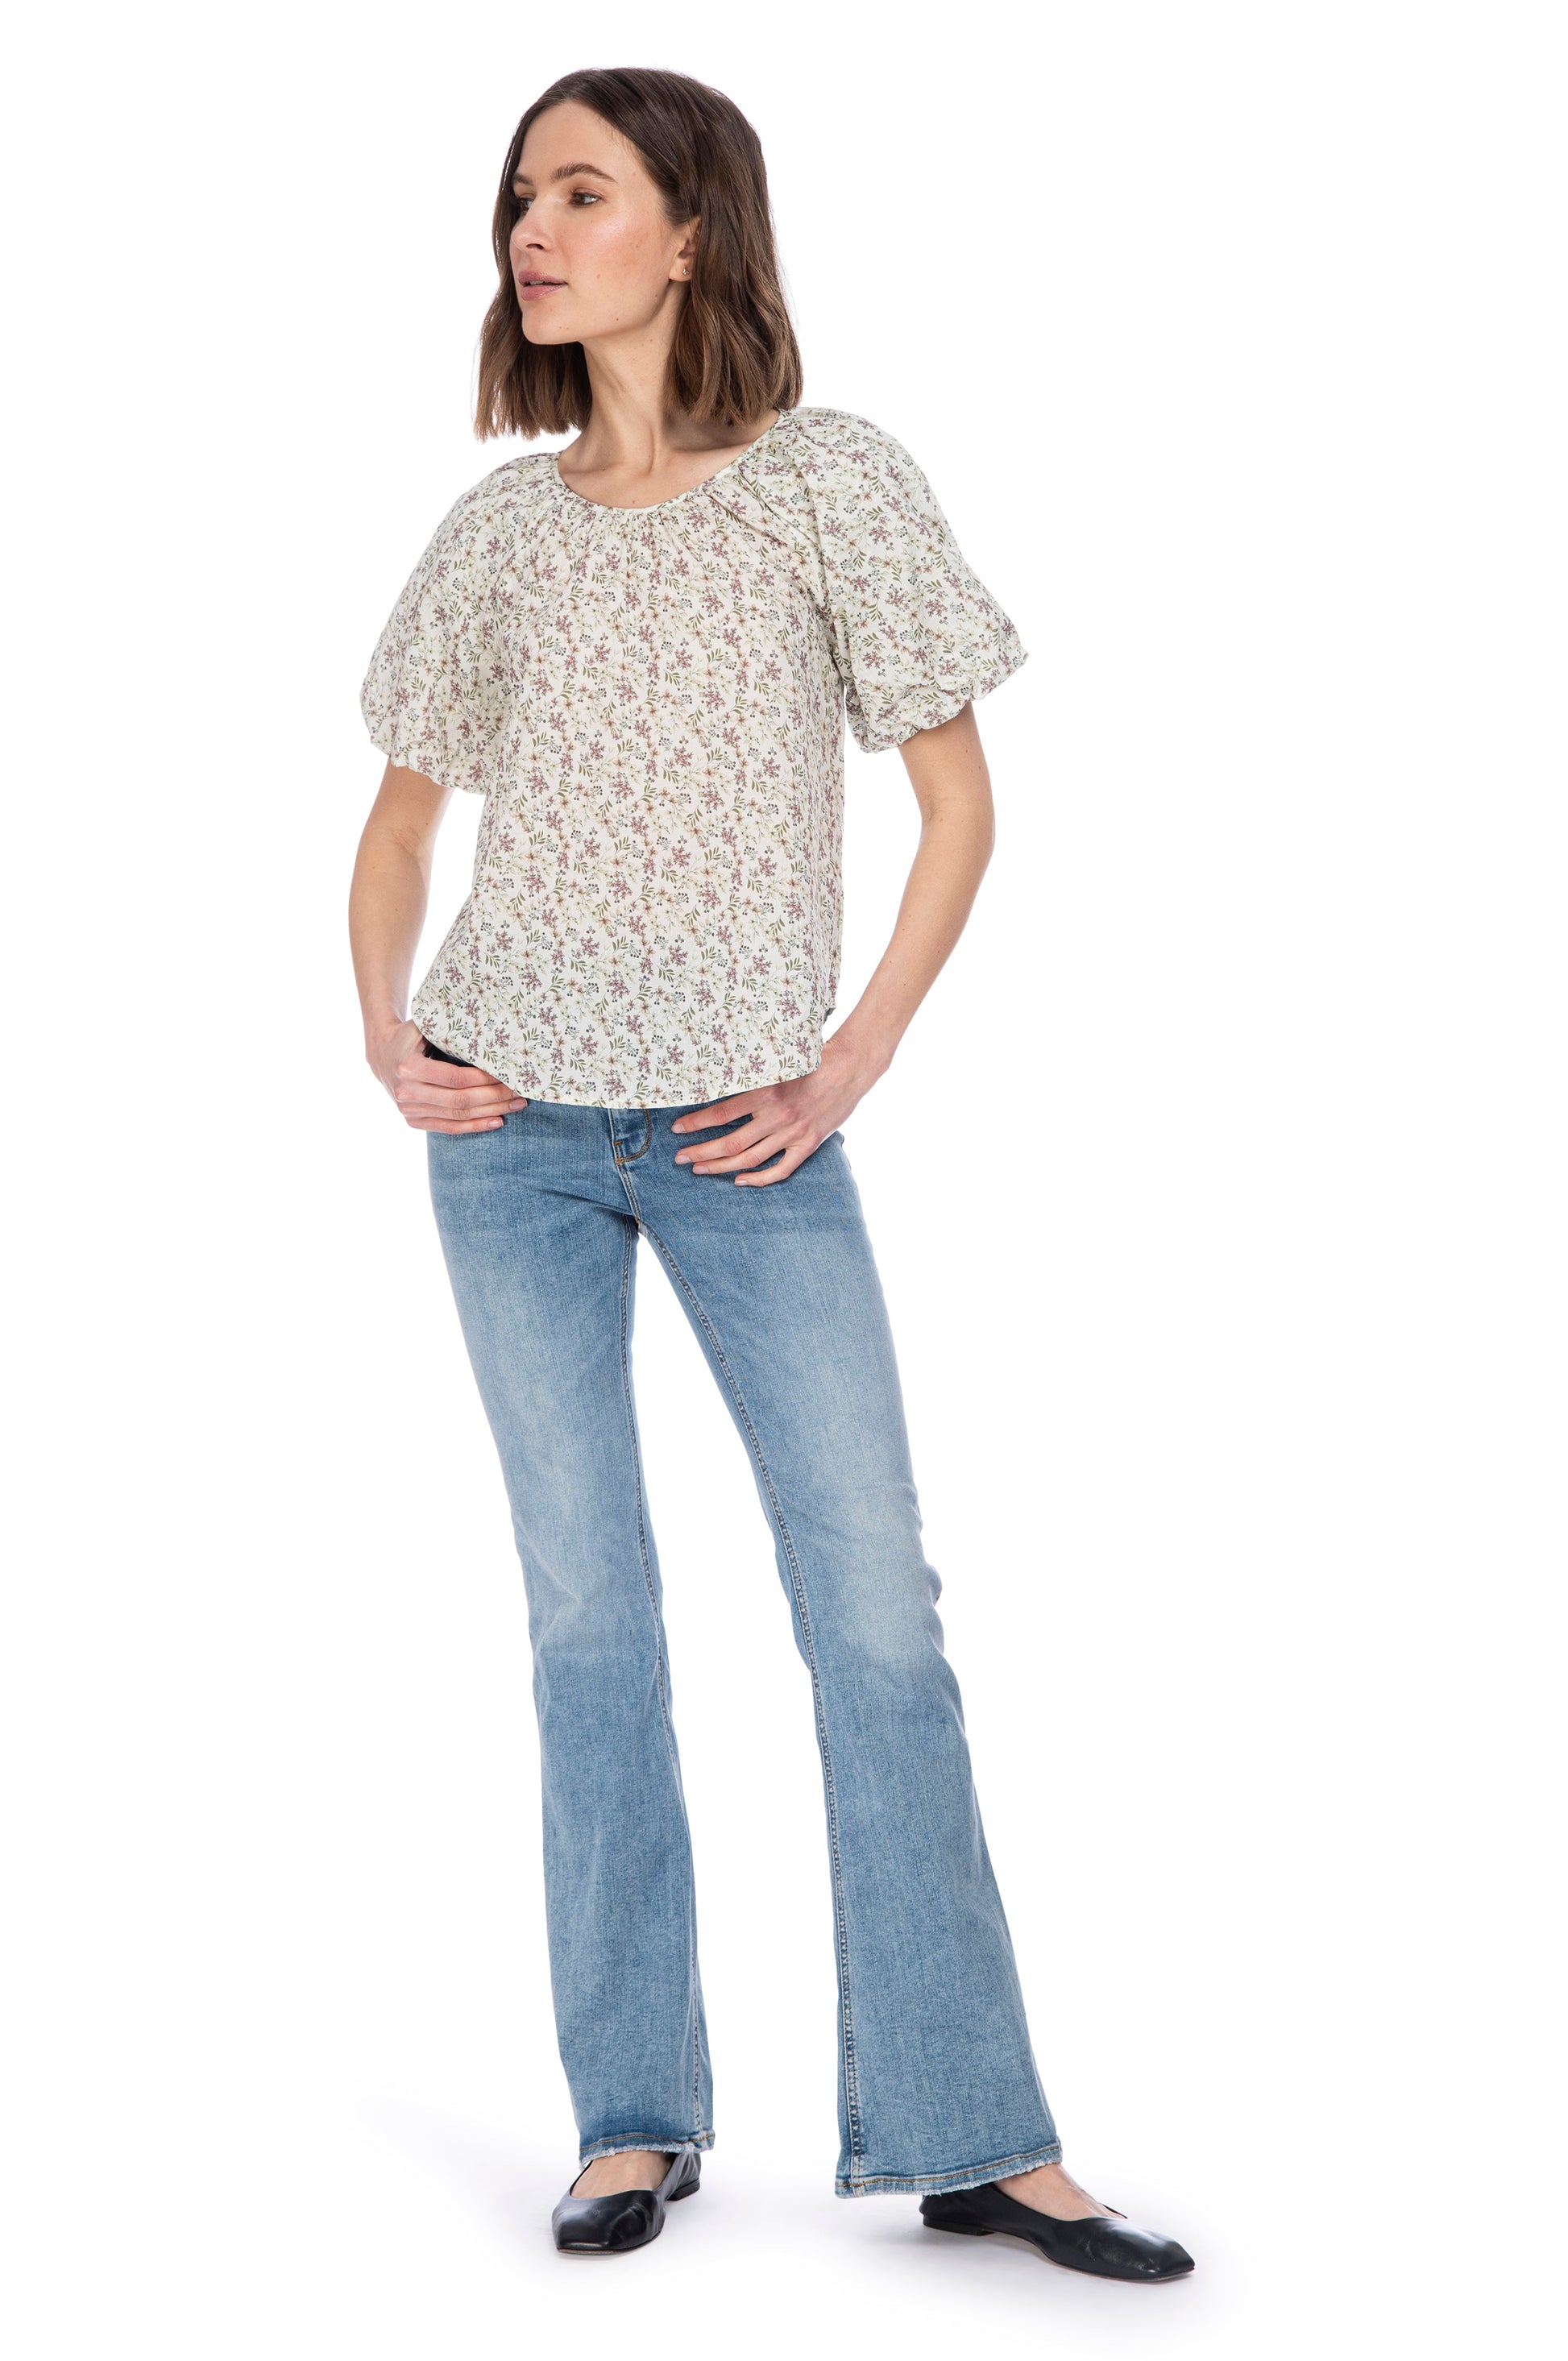 Woman posing in casual attire with a crewneck Bubble Sleeve Cotton Top from B Collection by Bobeau featuring elastic sleeves, blue jeans, and black flats against a white background.